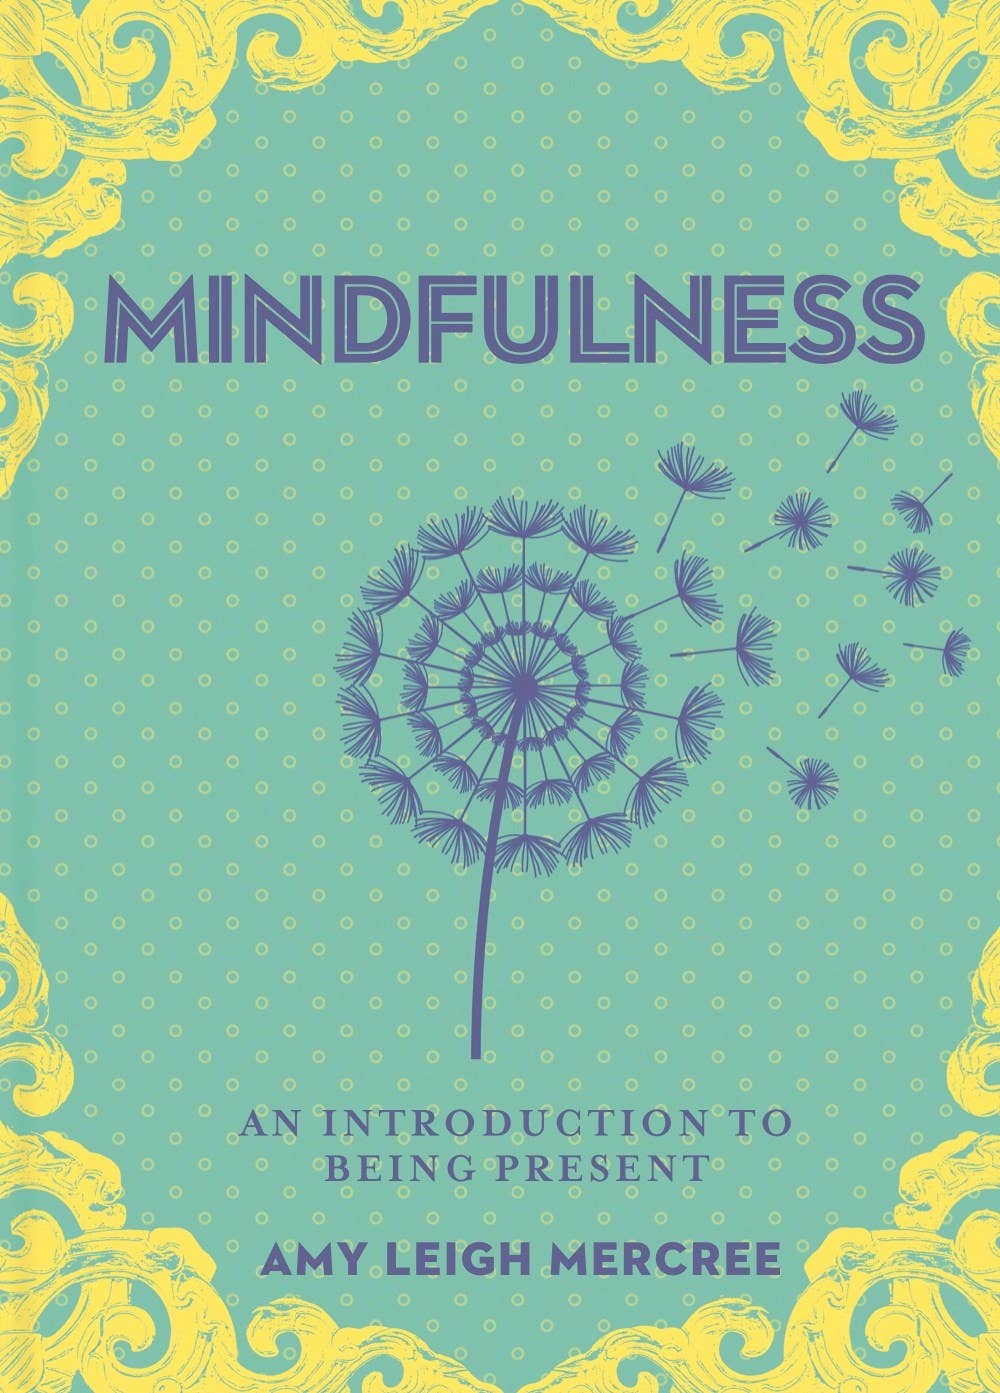 A Little Bit of Mindfulness by Amy Leigh Mercree - Spiral Circle